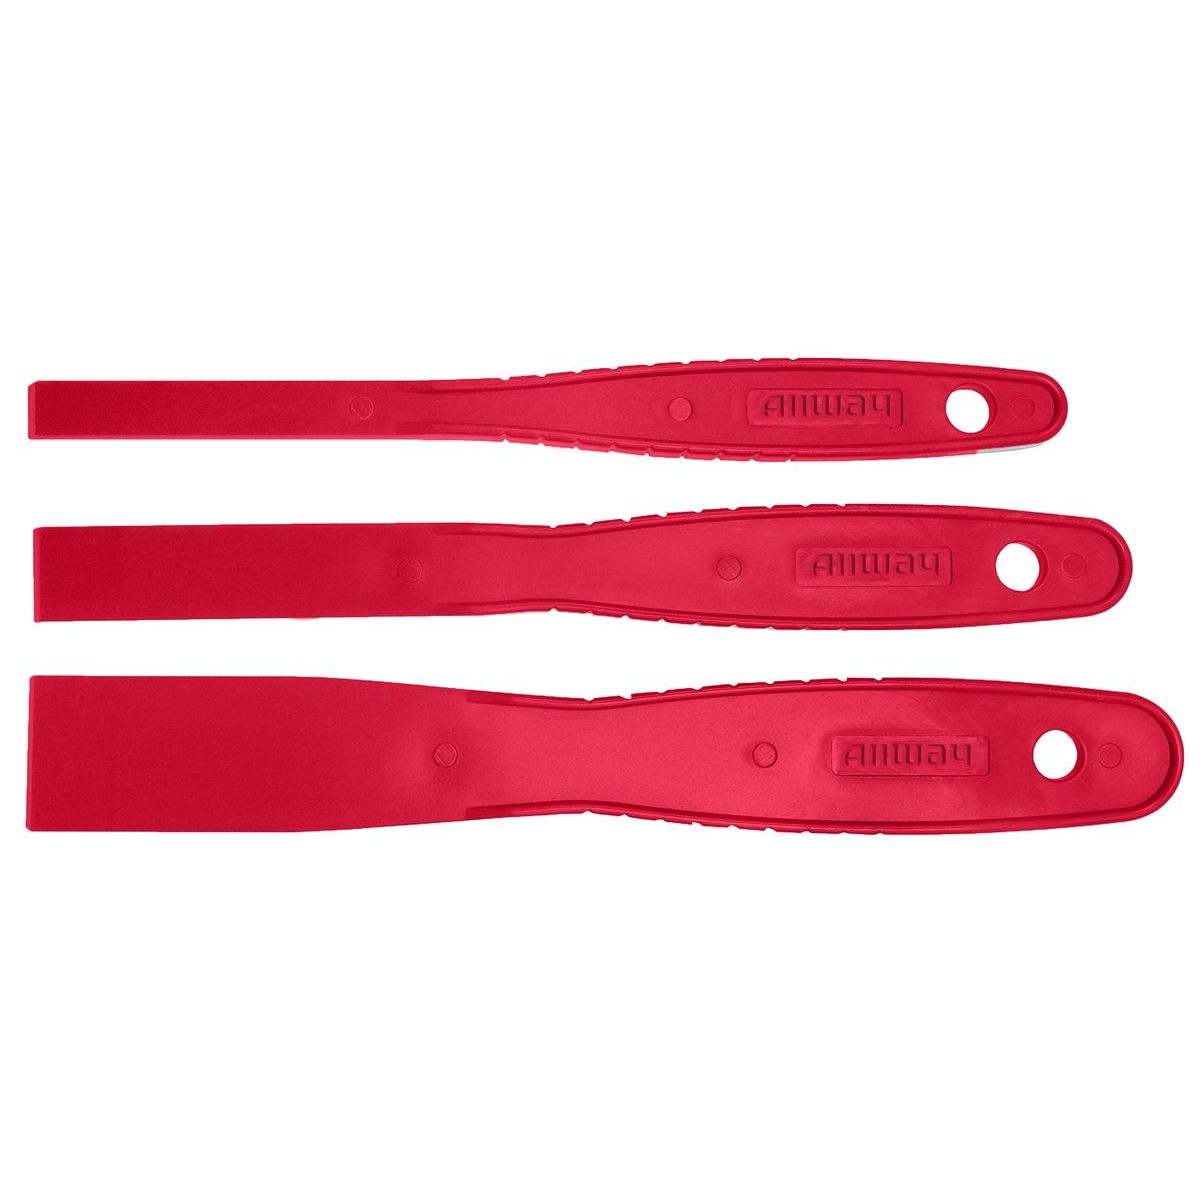 Vim Products 3 Piece Flexible Stainless Steel Putty Knife Set